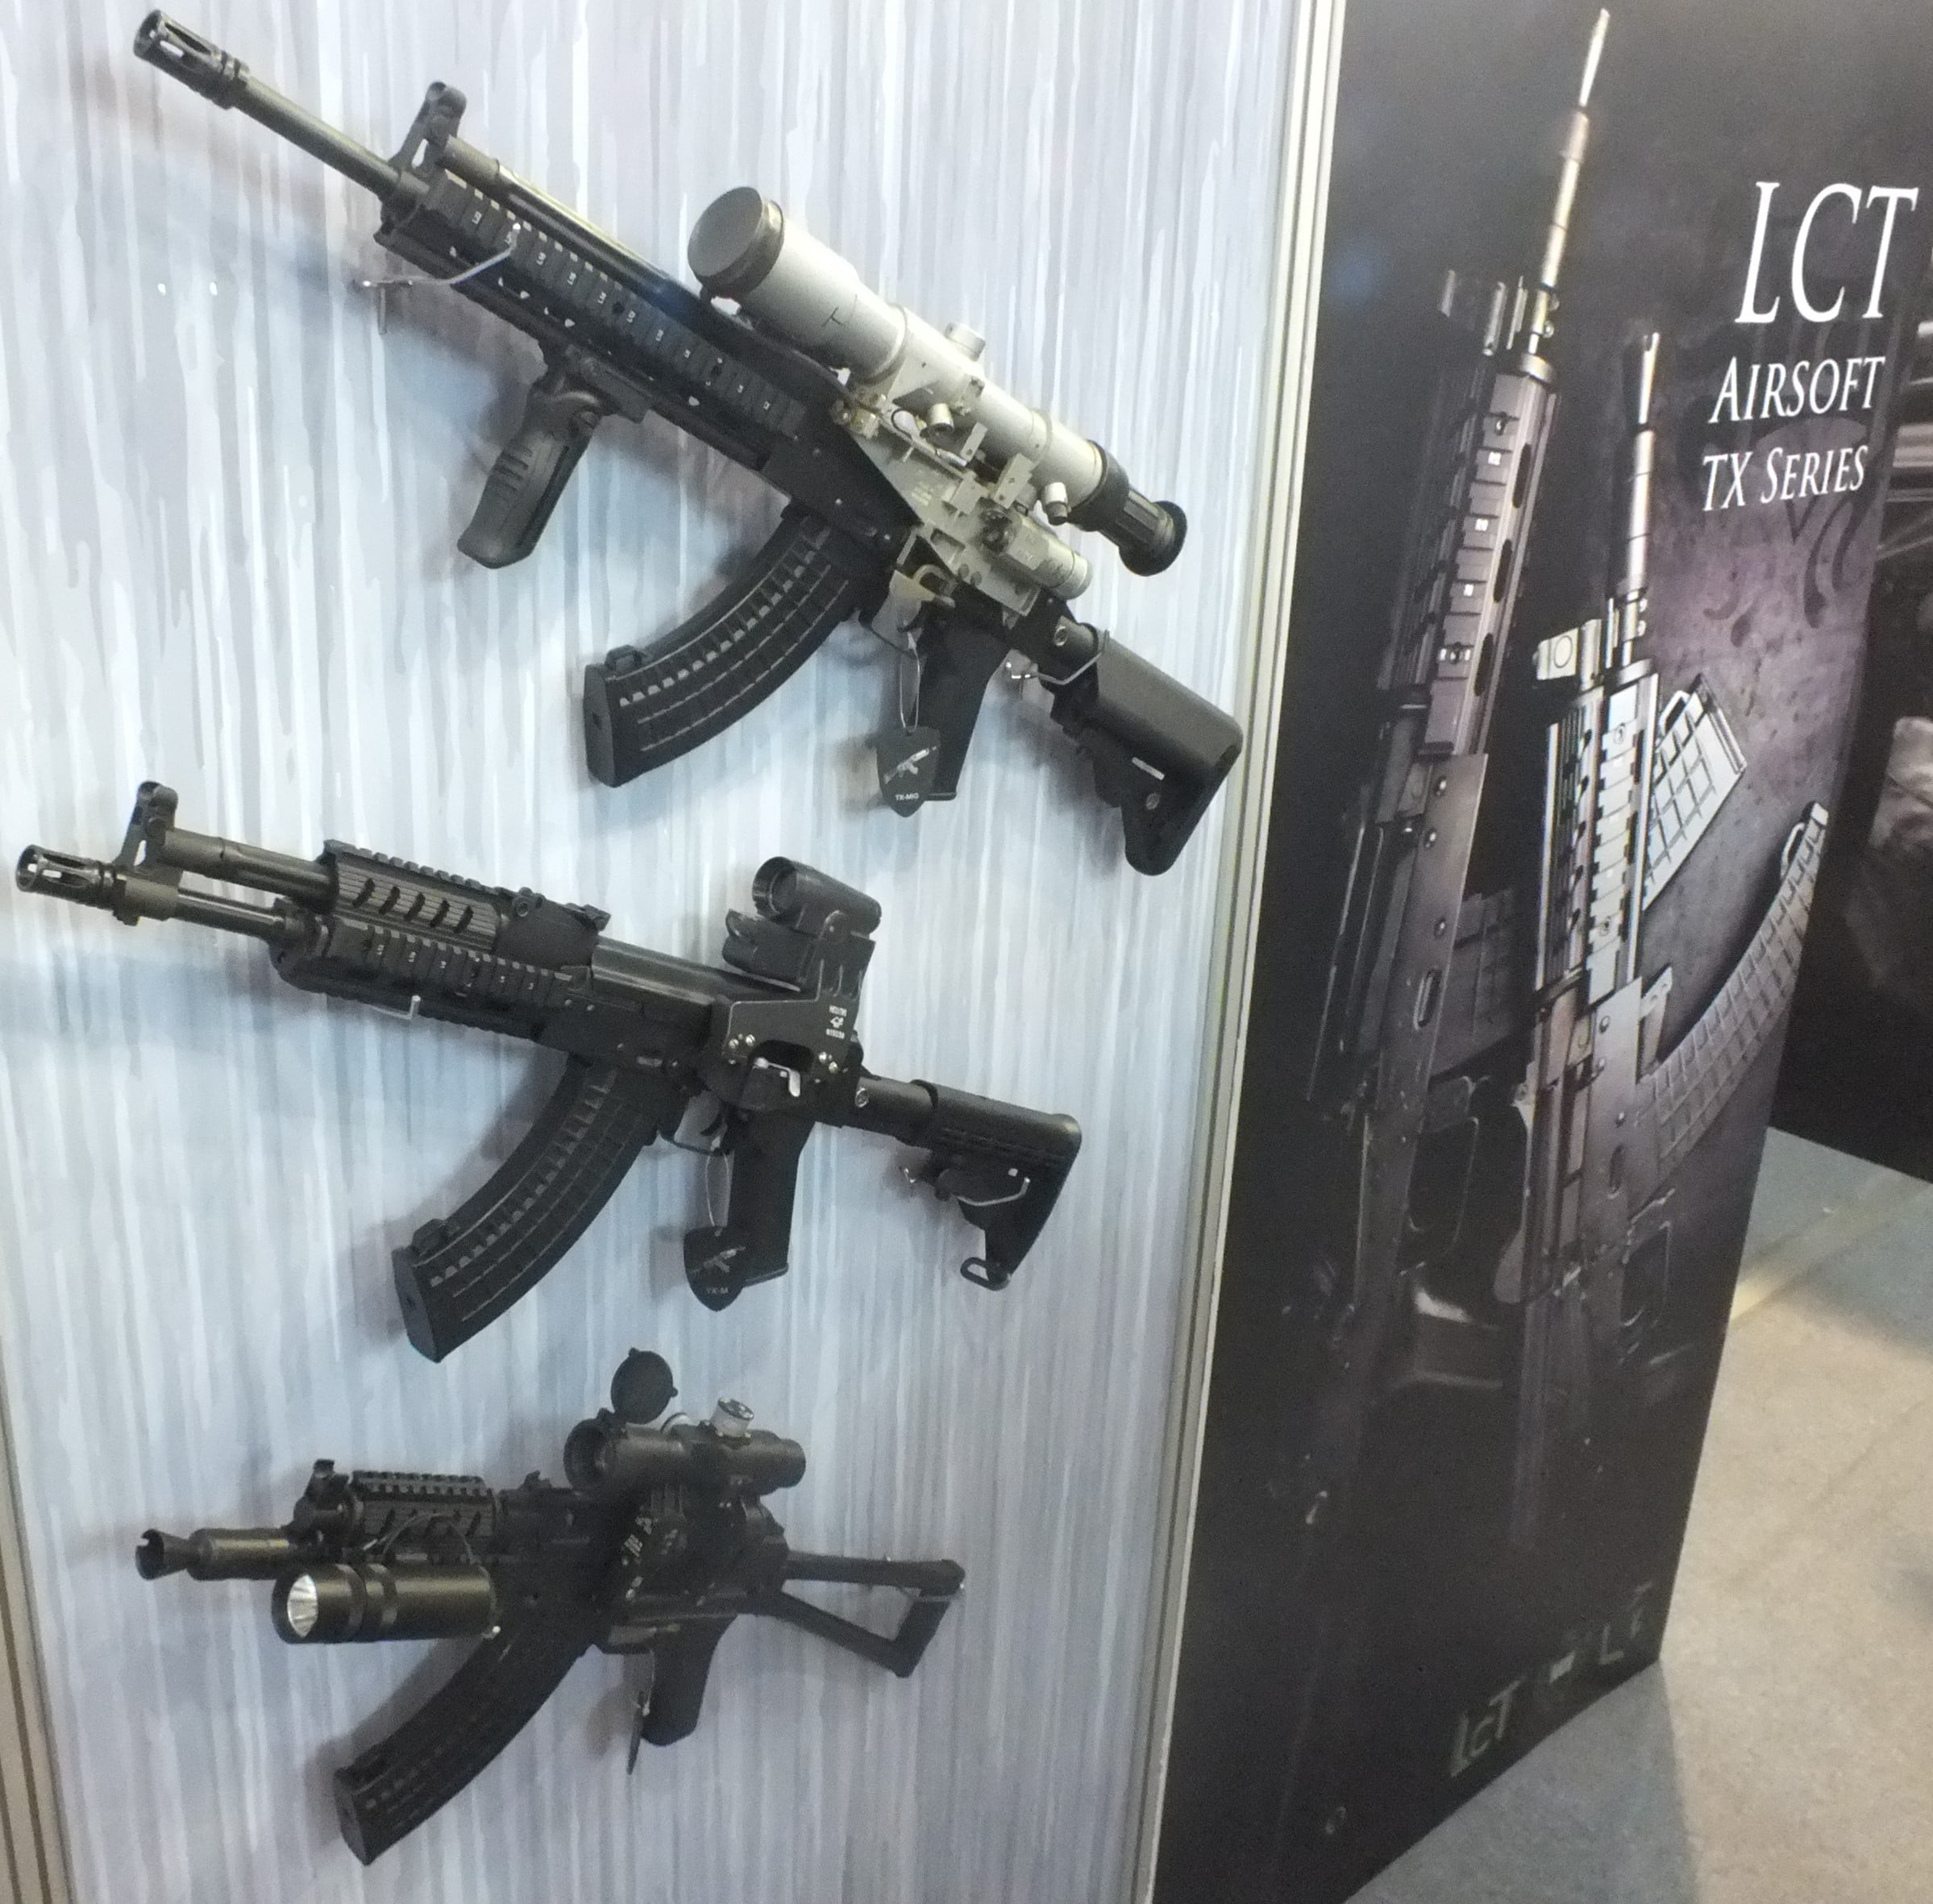 LCT Airsoft Booth